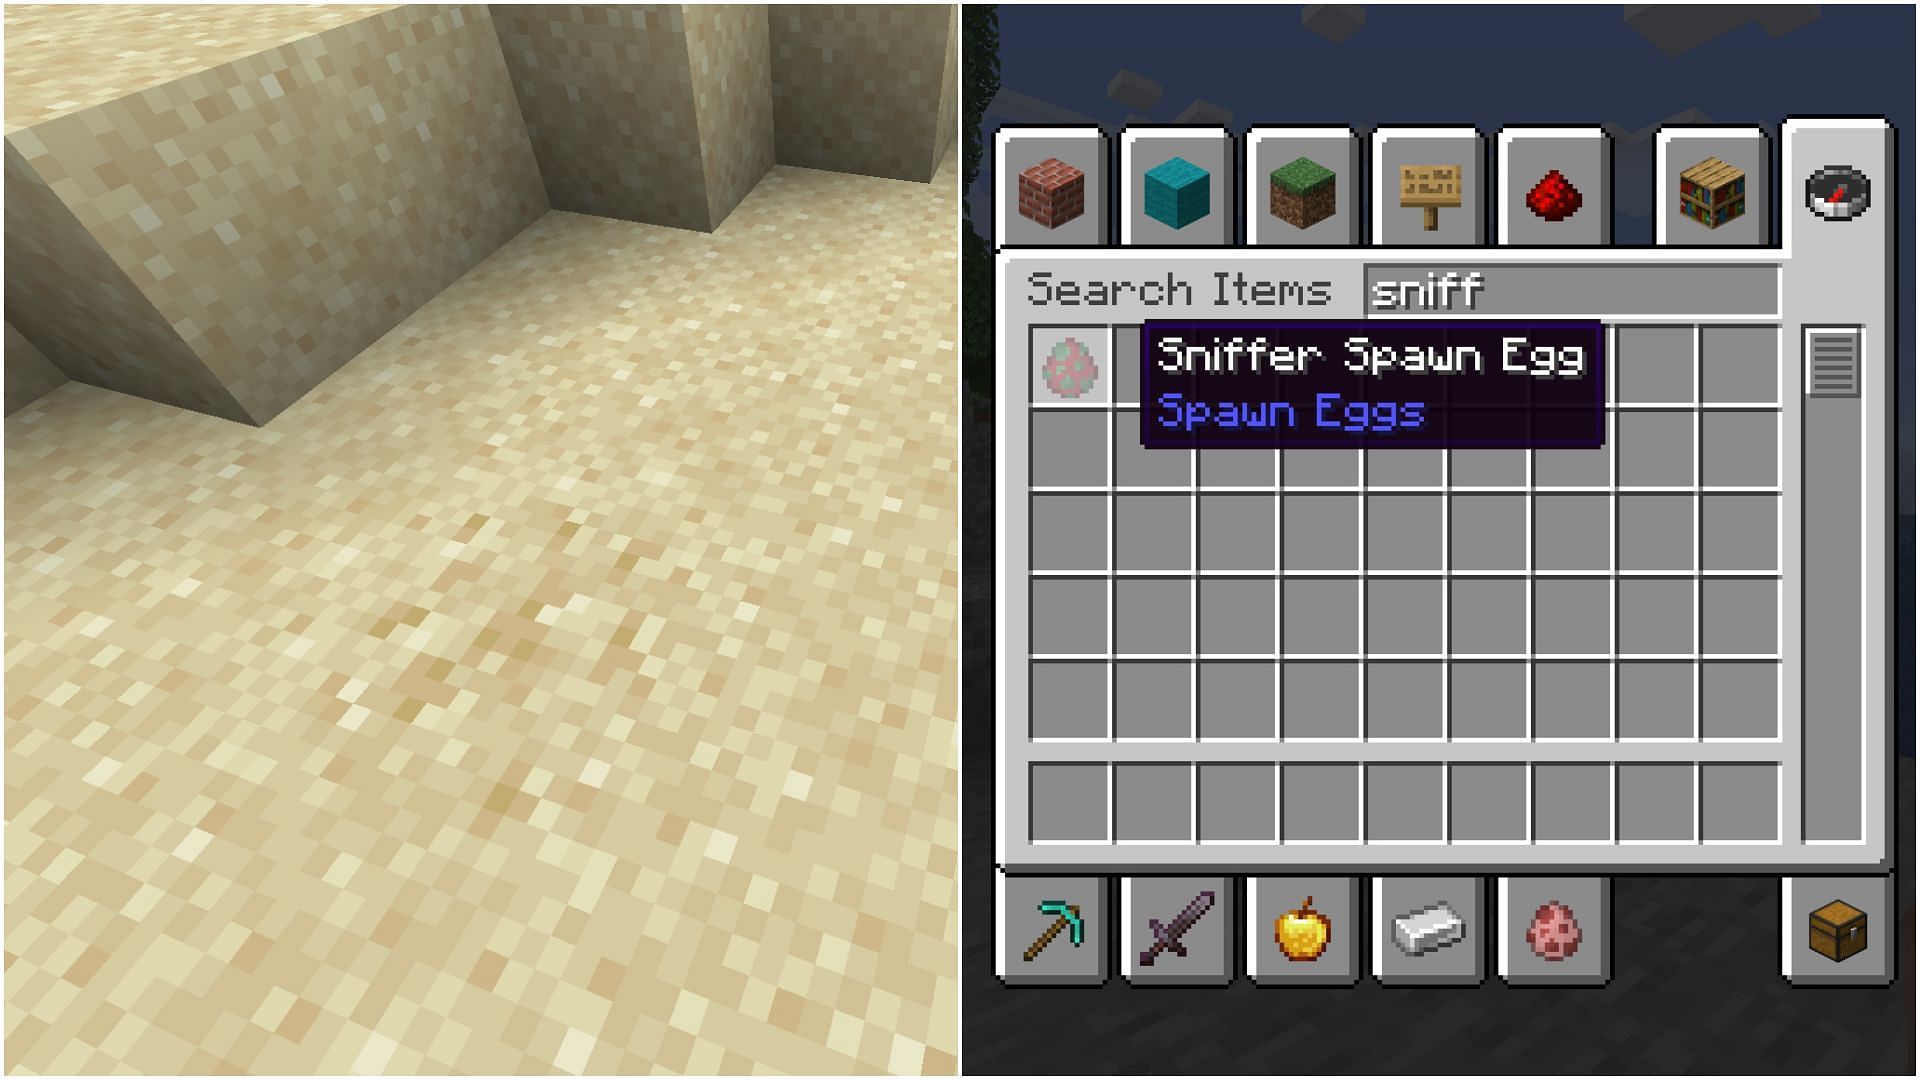 In Minecraft 1.20, Sniffer eggs can either be obtained by brushing suspicious sand or they can spawn through spawn eggs (Image via Sportskeeda)